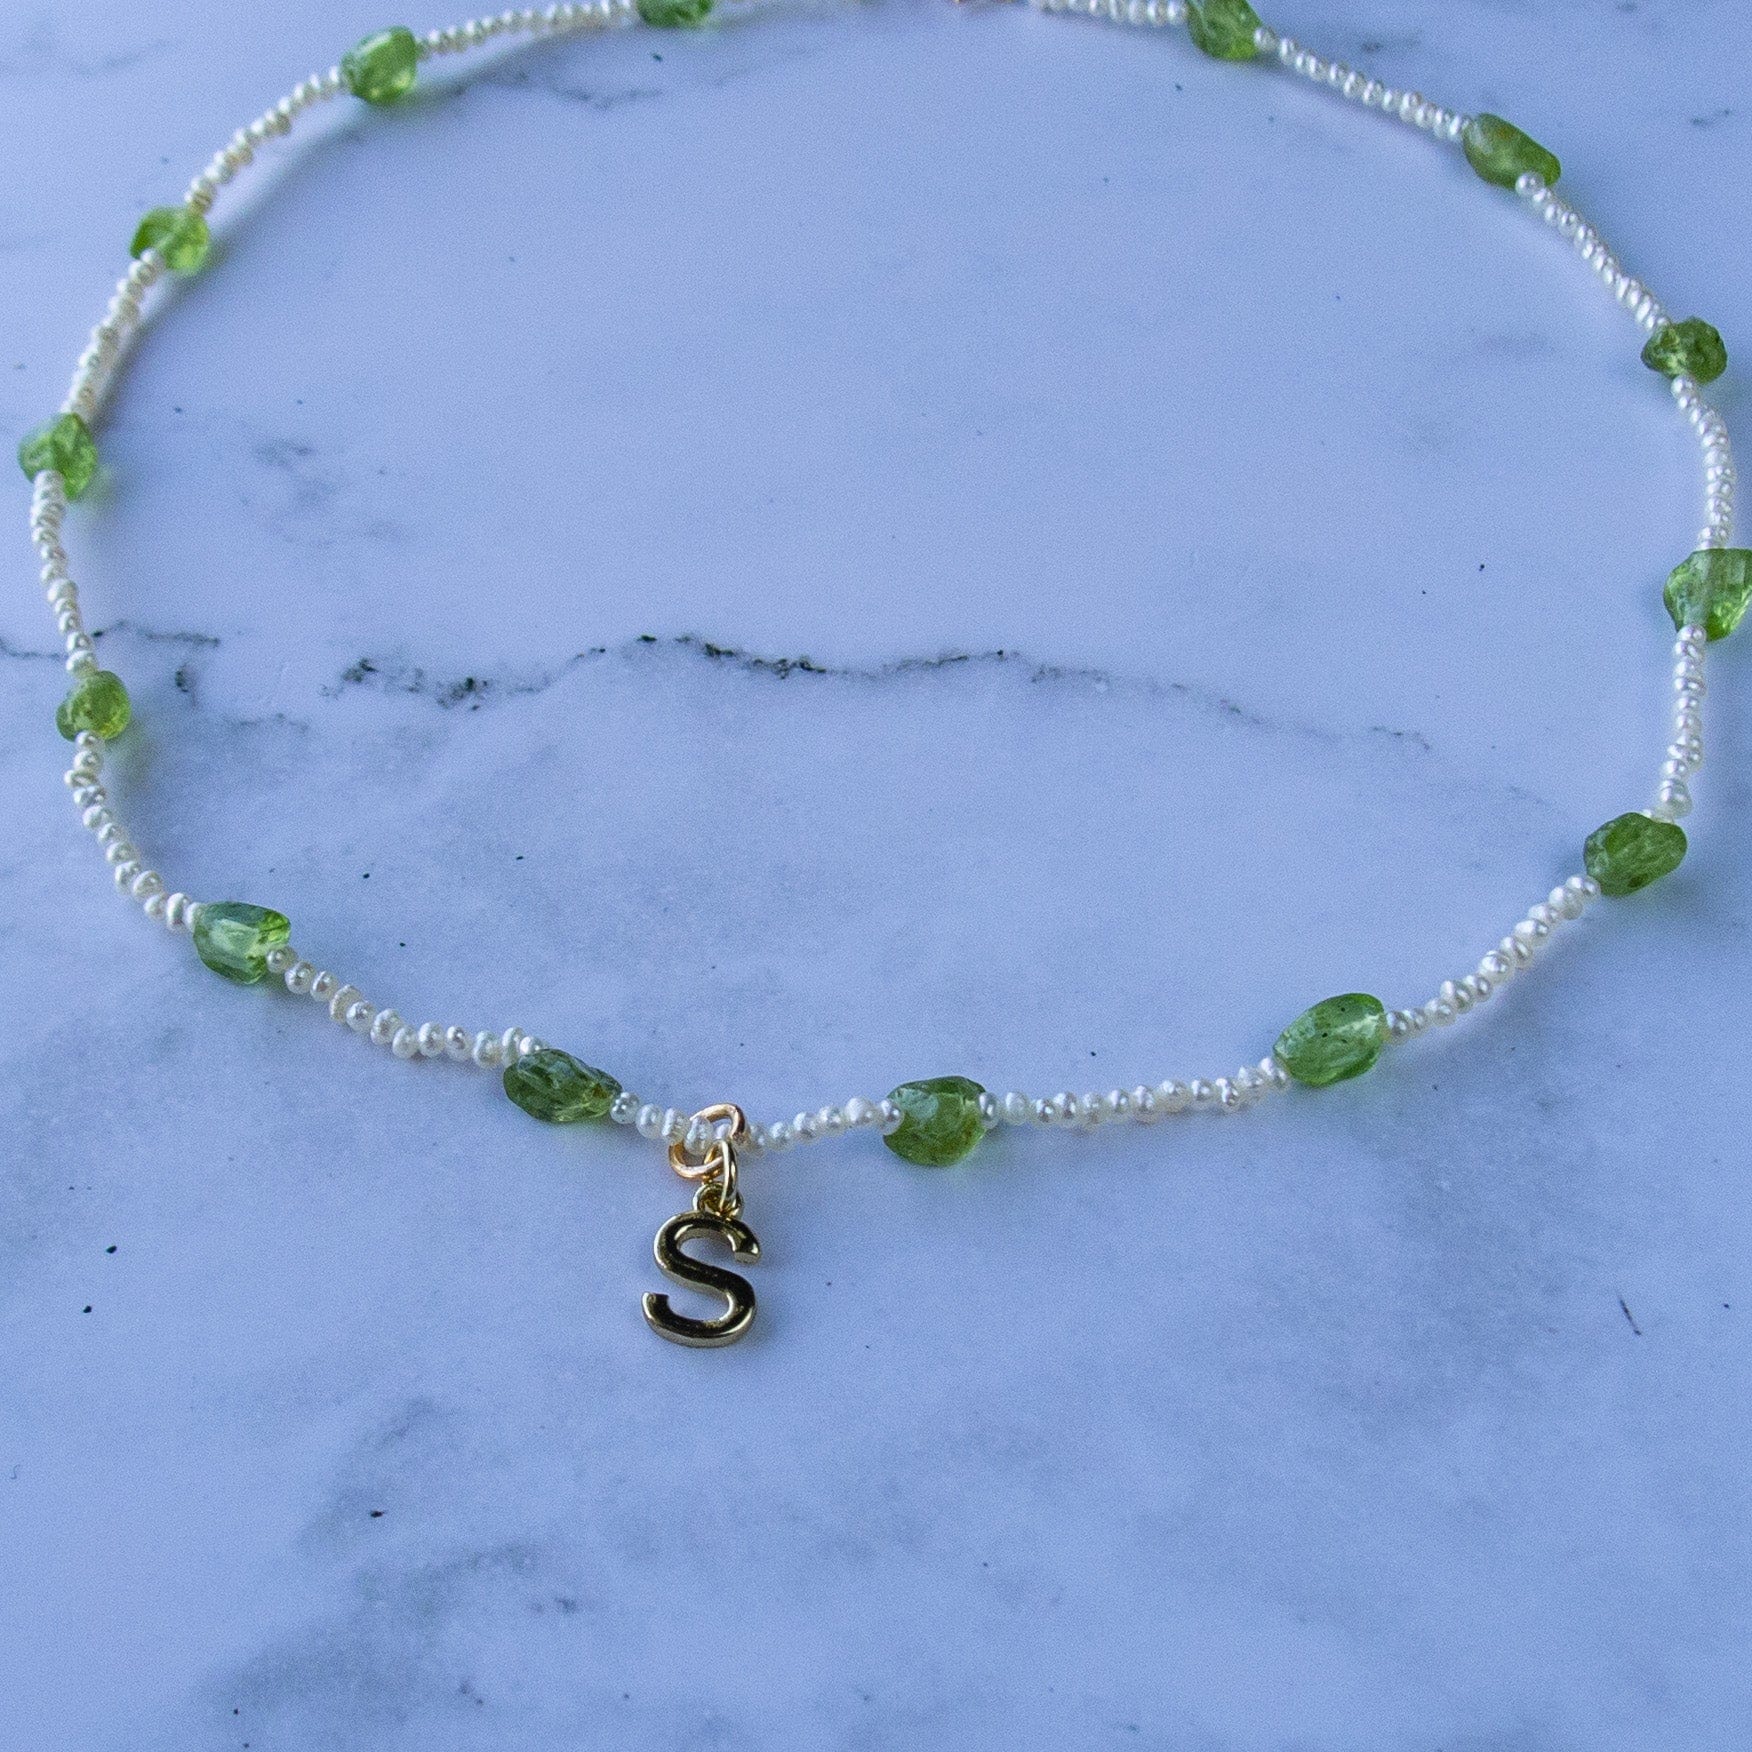 Cheekoo's Handcrafted Natural Peridot White Freshwater Tiny Pearl Necklace